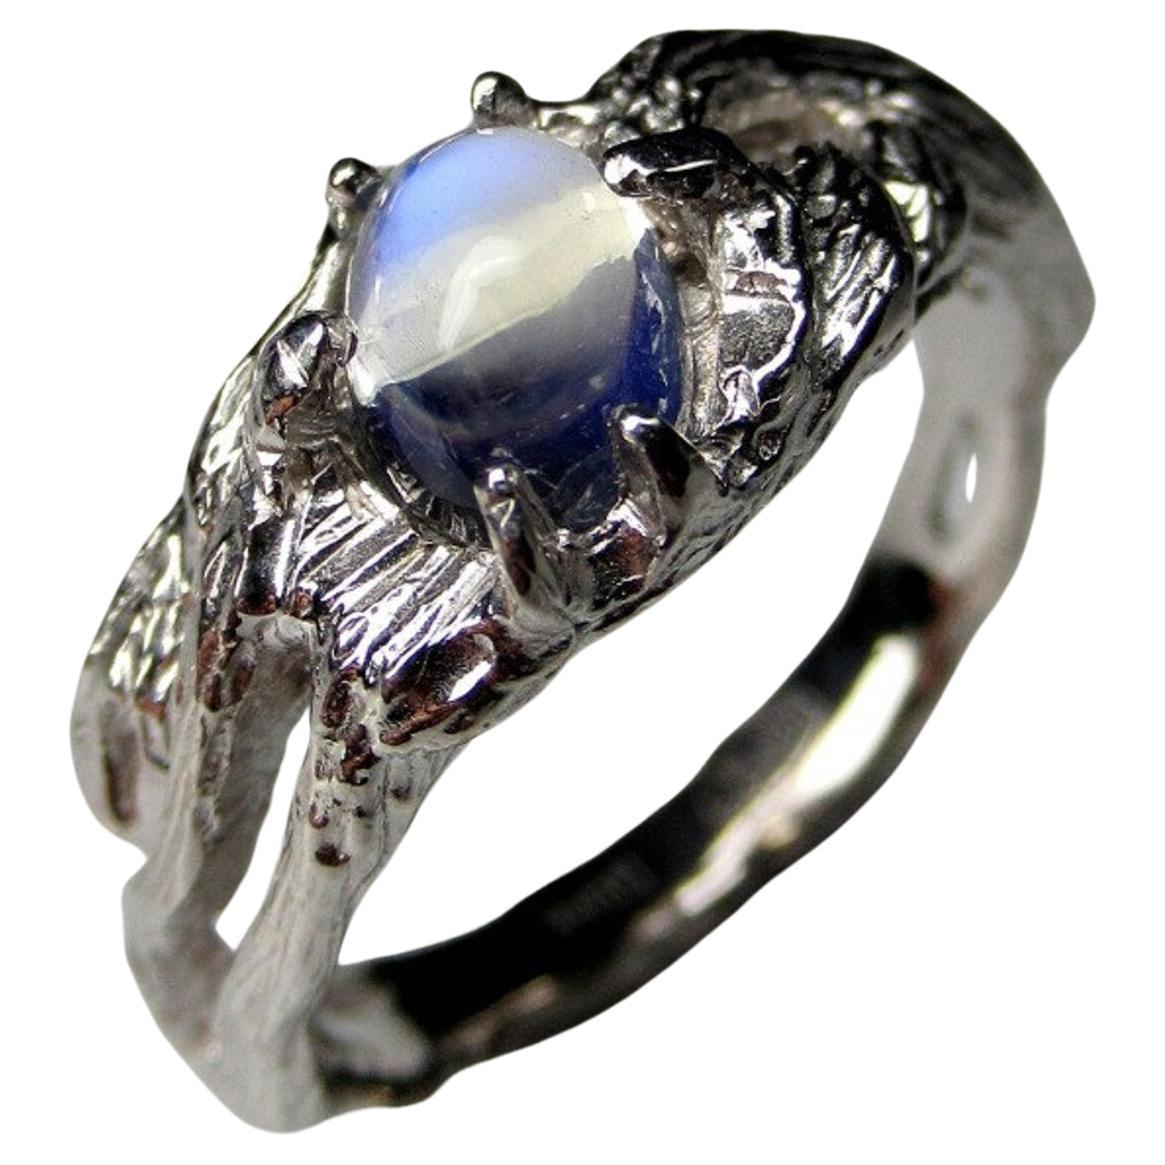 Adularia Moonstone Silver Ring Cabochon fine quality wedding anniversary gift For Sale